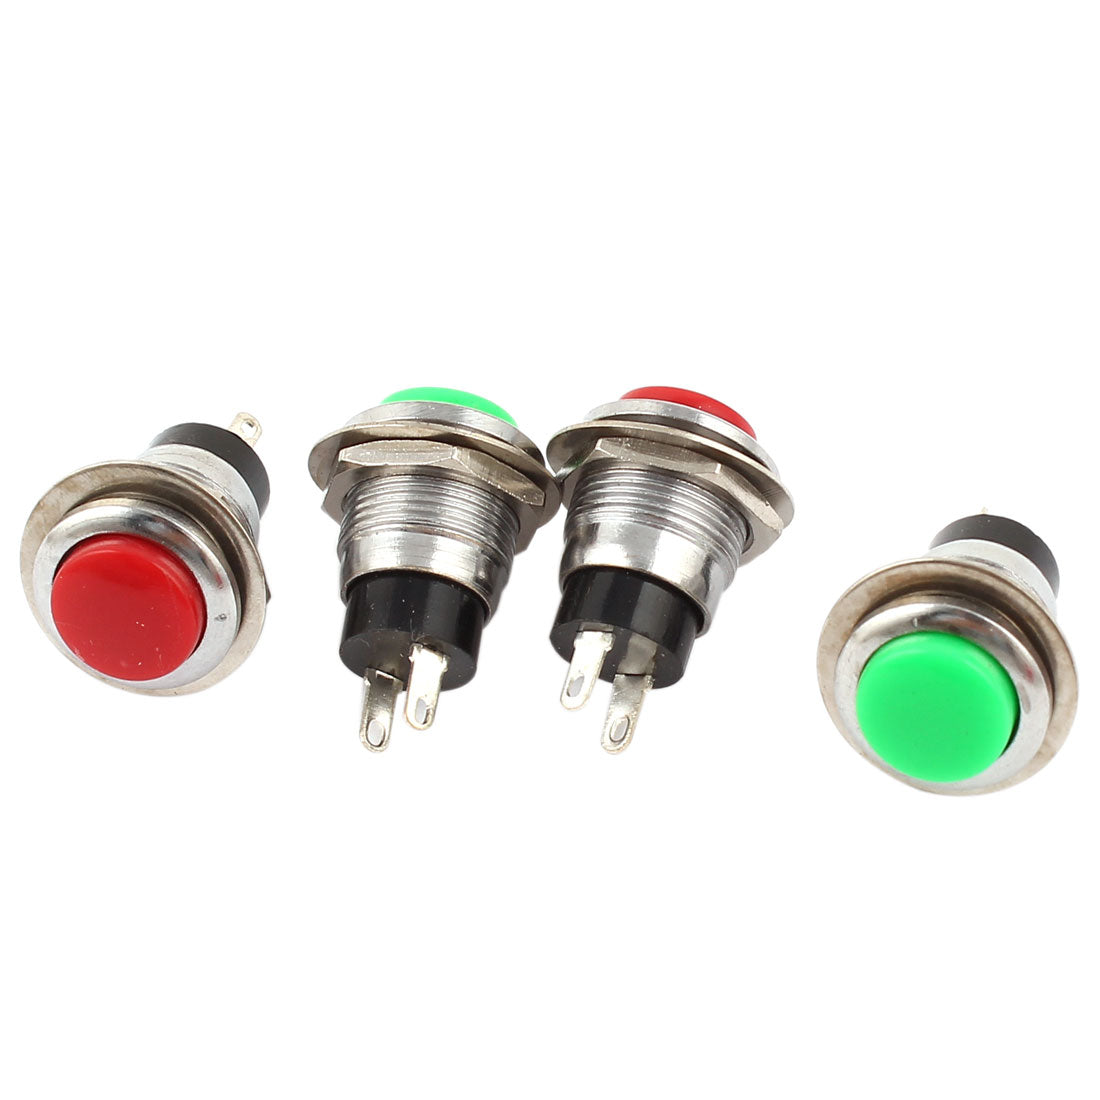 uxcell Uxcell 4PCS 12mm Mount SPST Momentary Red Green Button Switch AC125V 6A 250V 3A